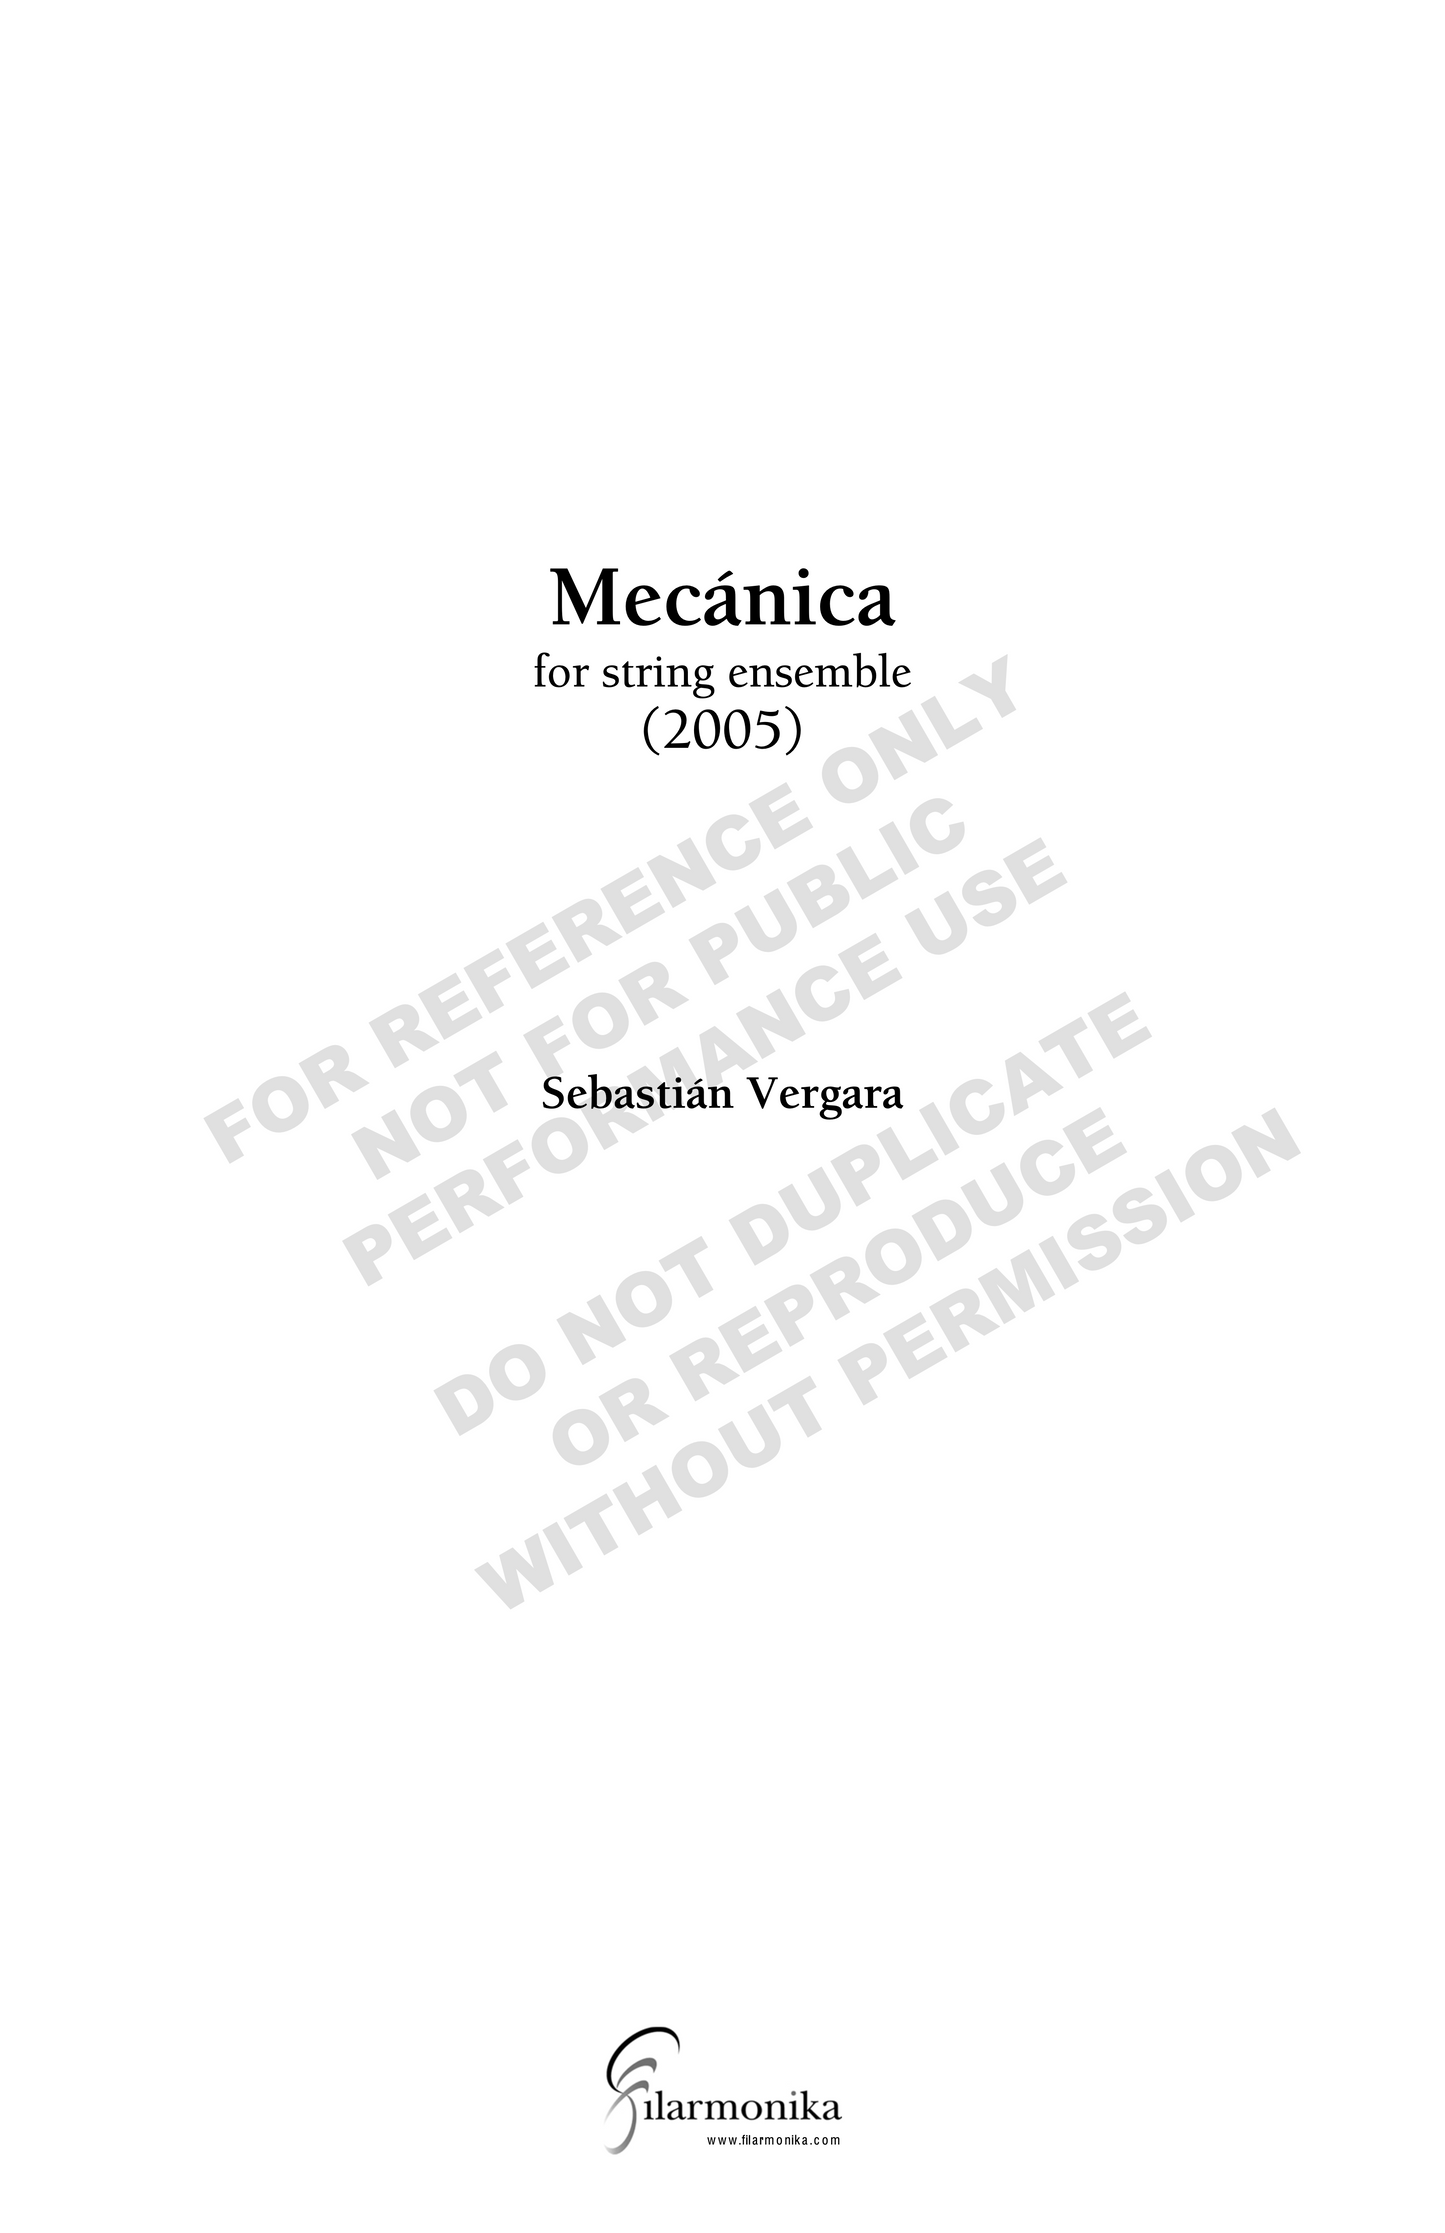 Mecánica, for strings